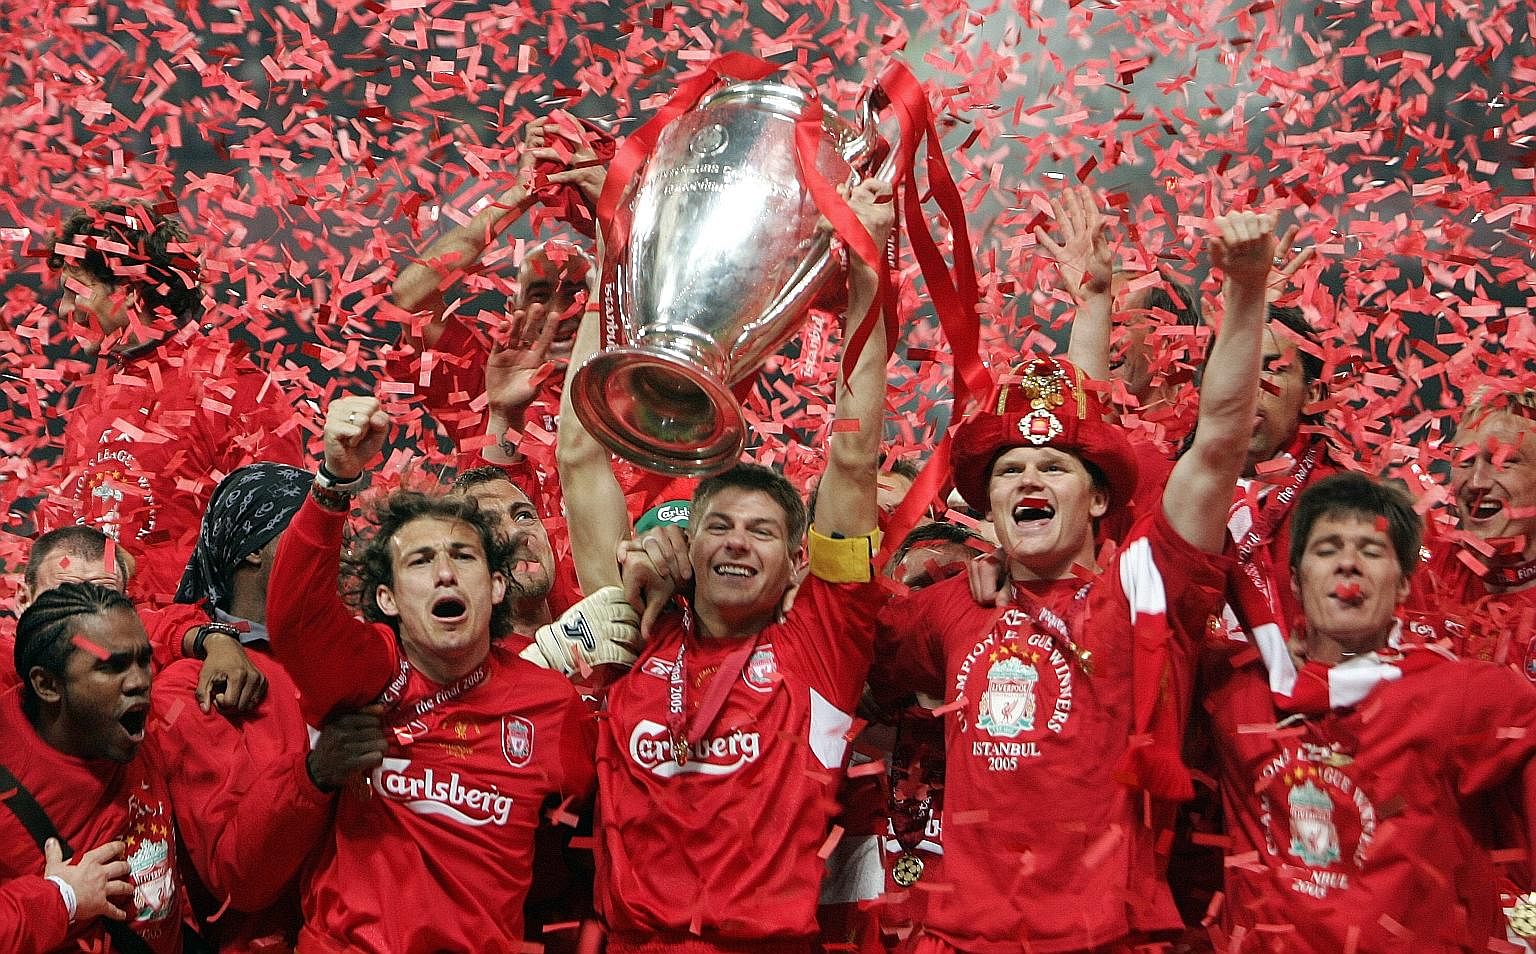 Liverpool's captain Steven Gerrard (holding the trophy) and his jubilant teammates on May 25, 2005, at the end of the Uefa Champions League football final at the Ataturk Stadium in Istanbul, where Liverpool beat AC Milan in dramatic fashion. Reunited